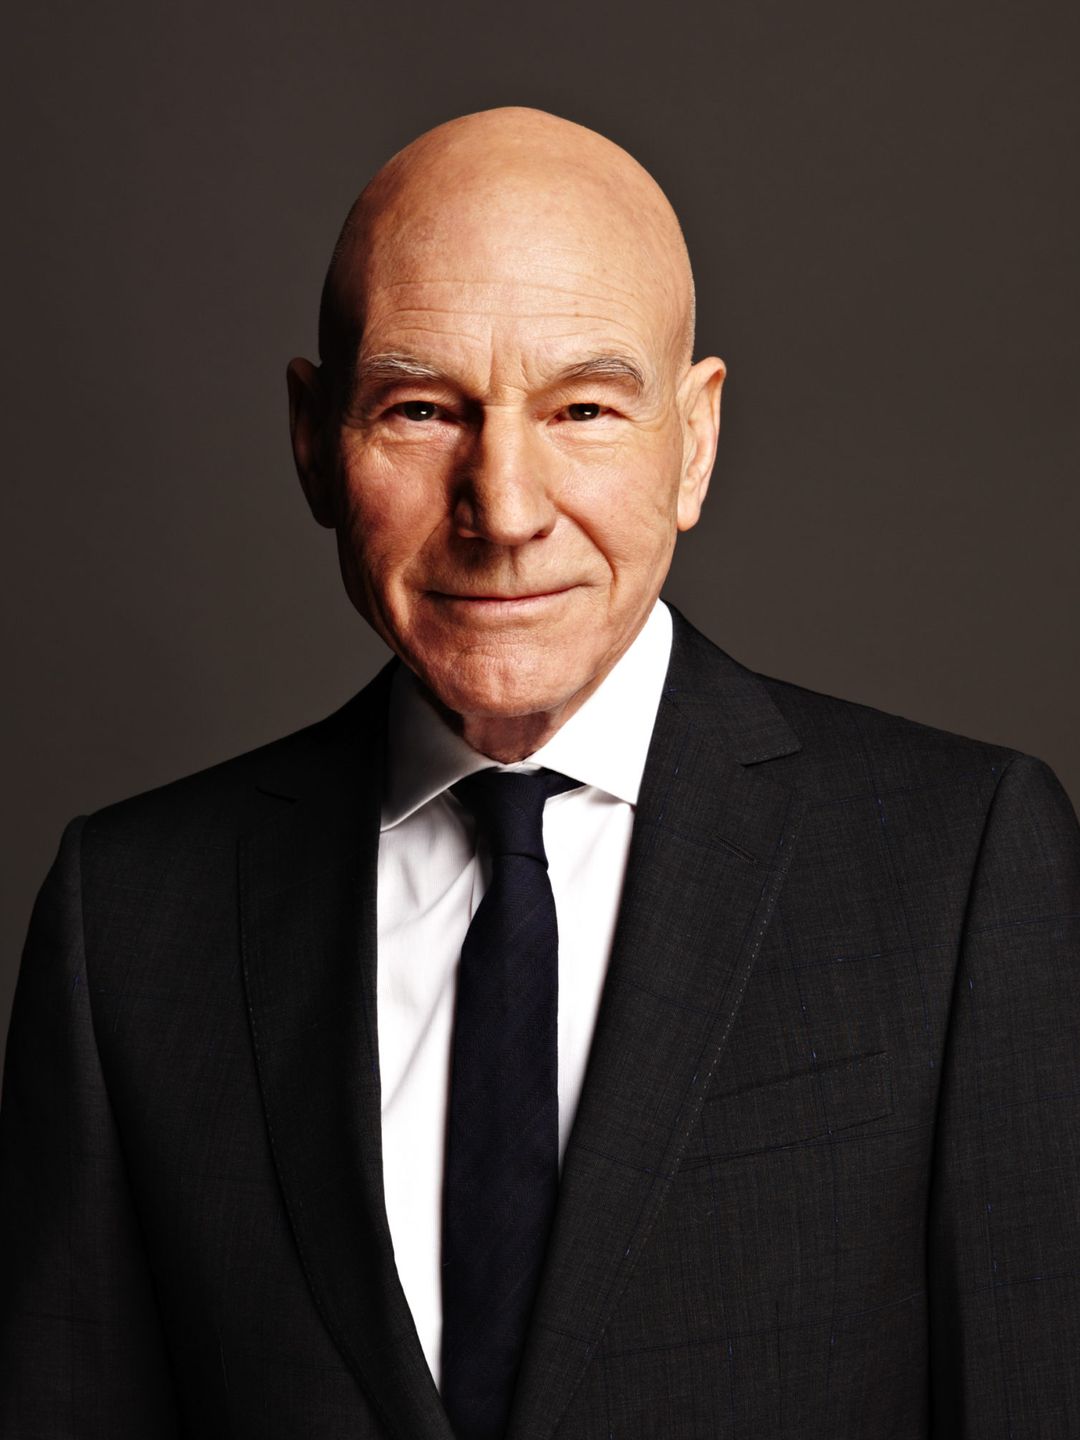 Patrick Stewart height and weight